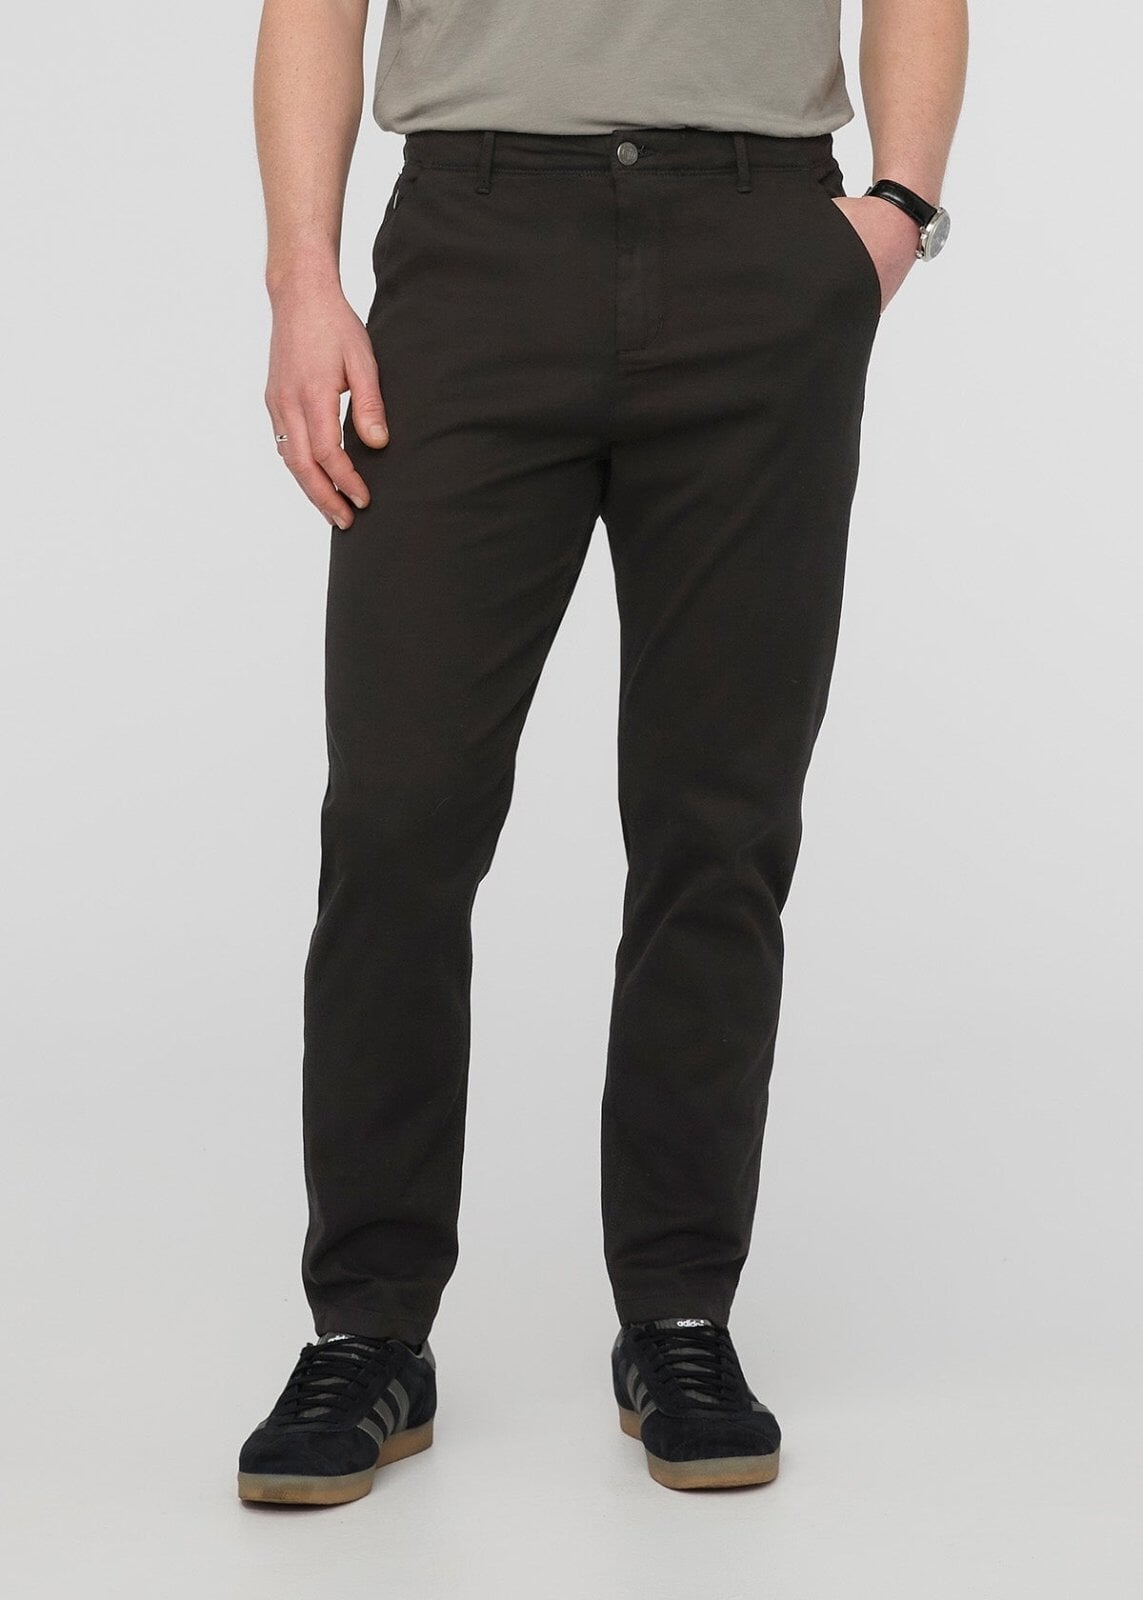 mens stretch black chino pants front